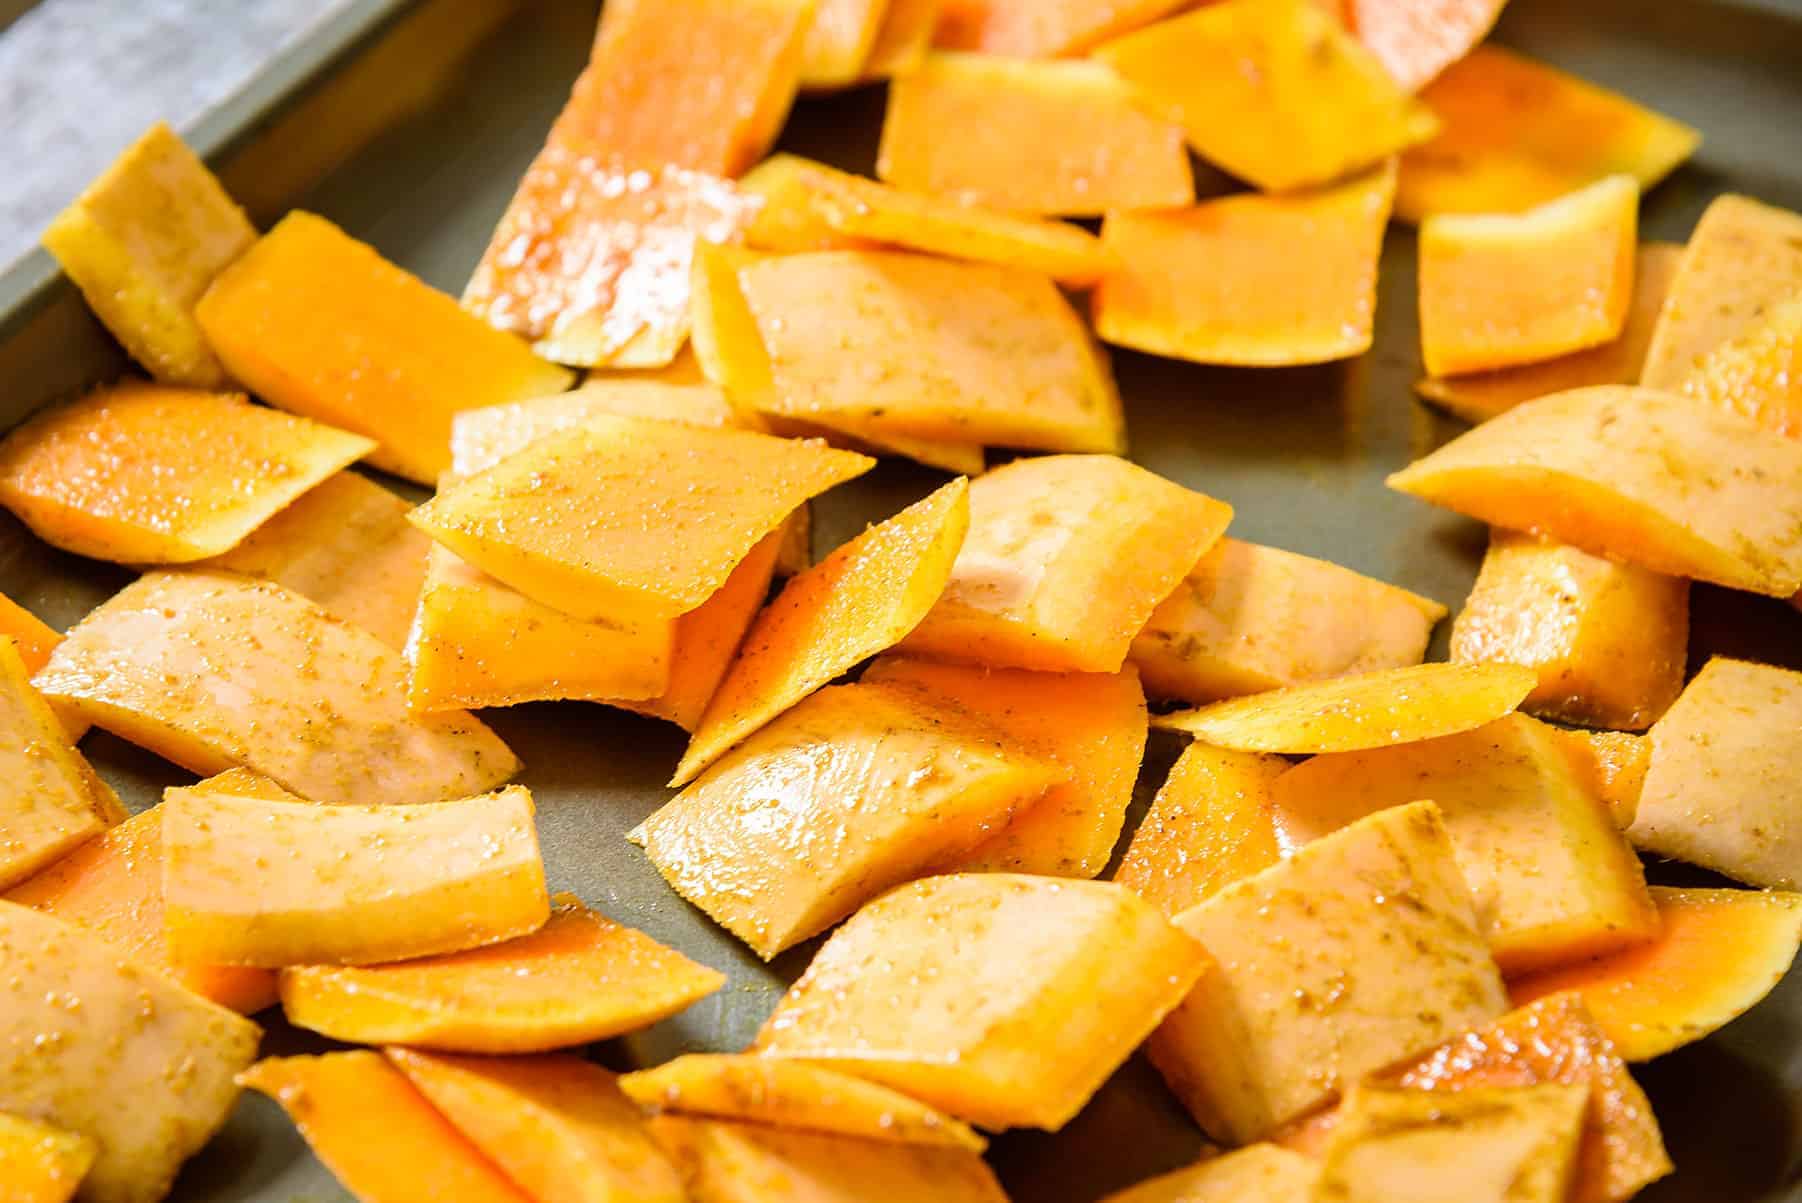 Seasoned Butternut Squash Skin Pieces on oven tray